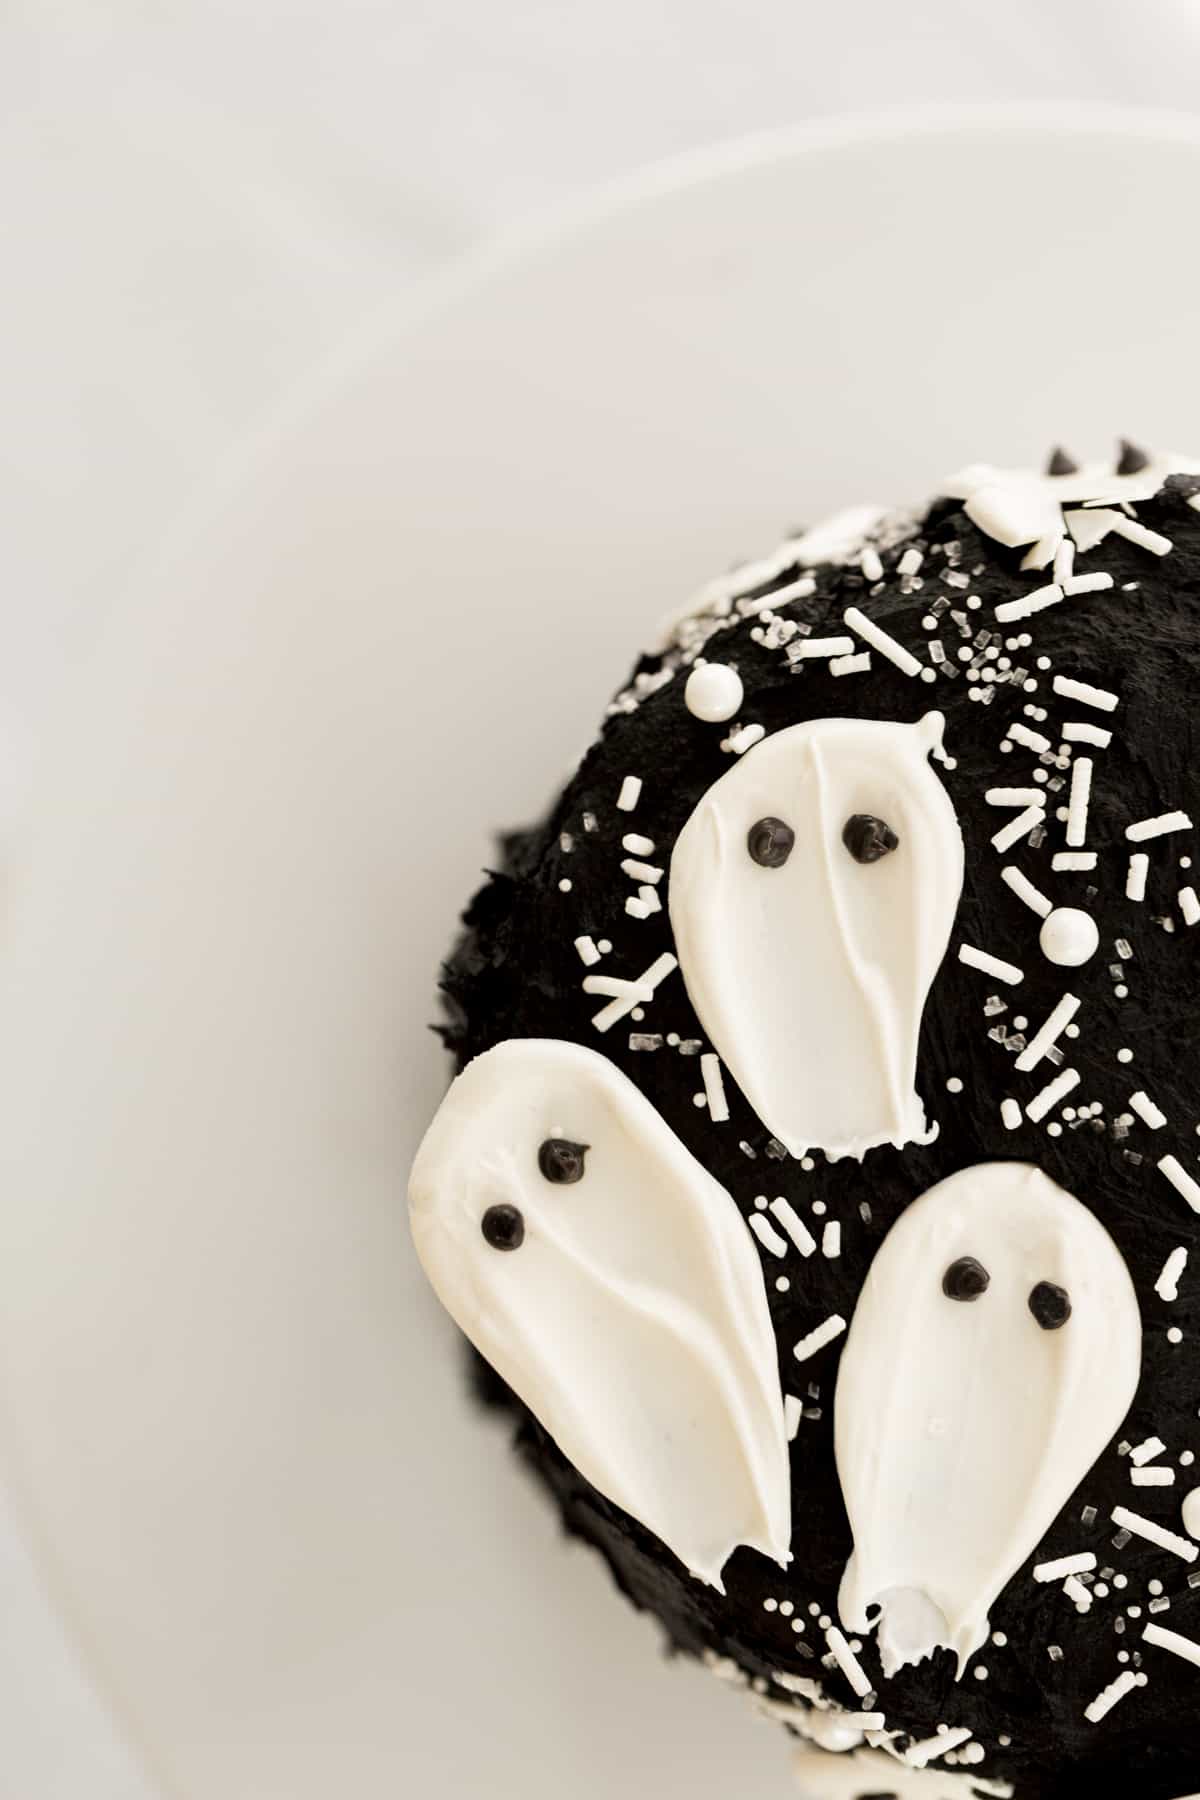 black velvet cake with white candy ghosts on a black cake stand